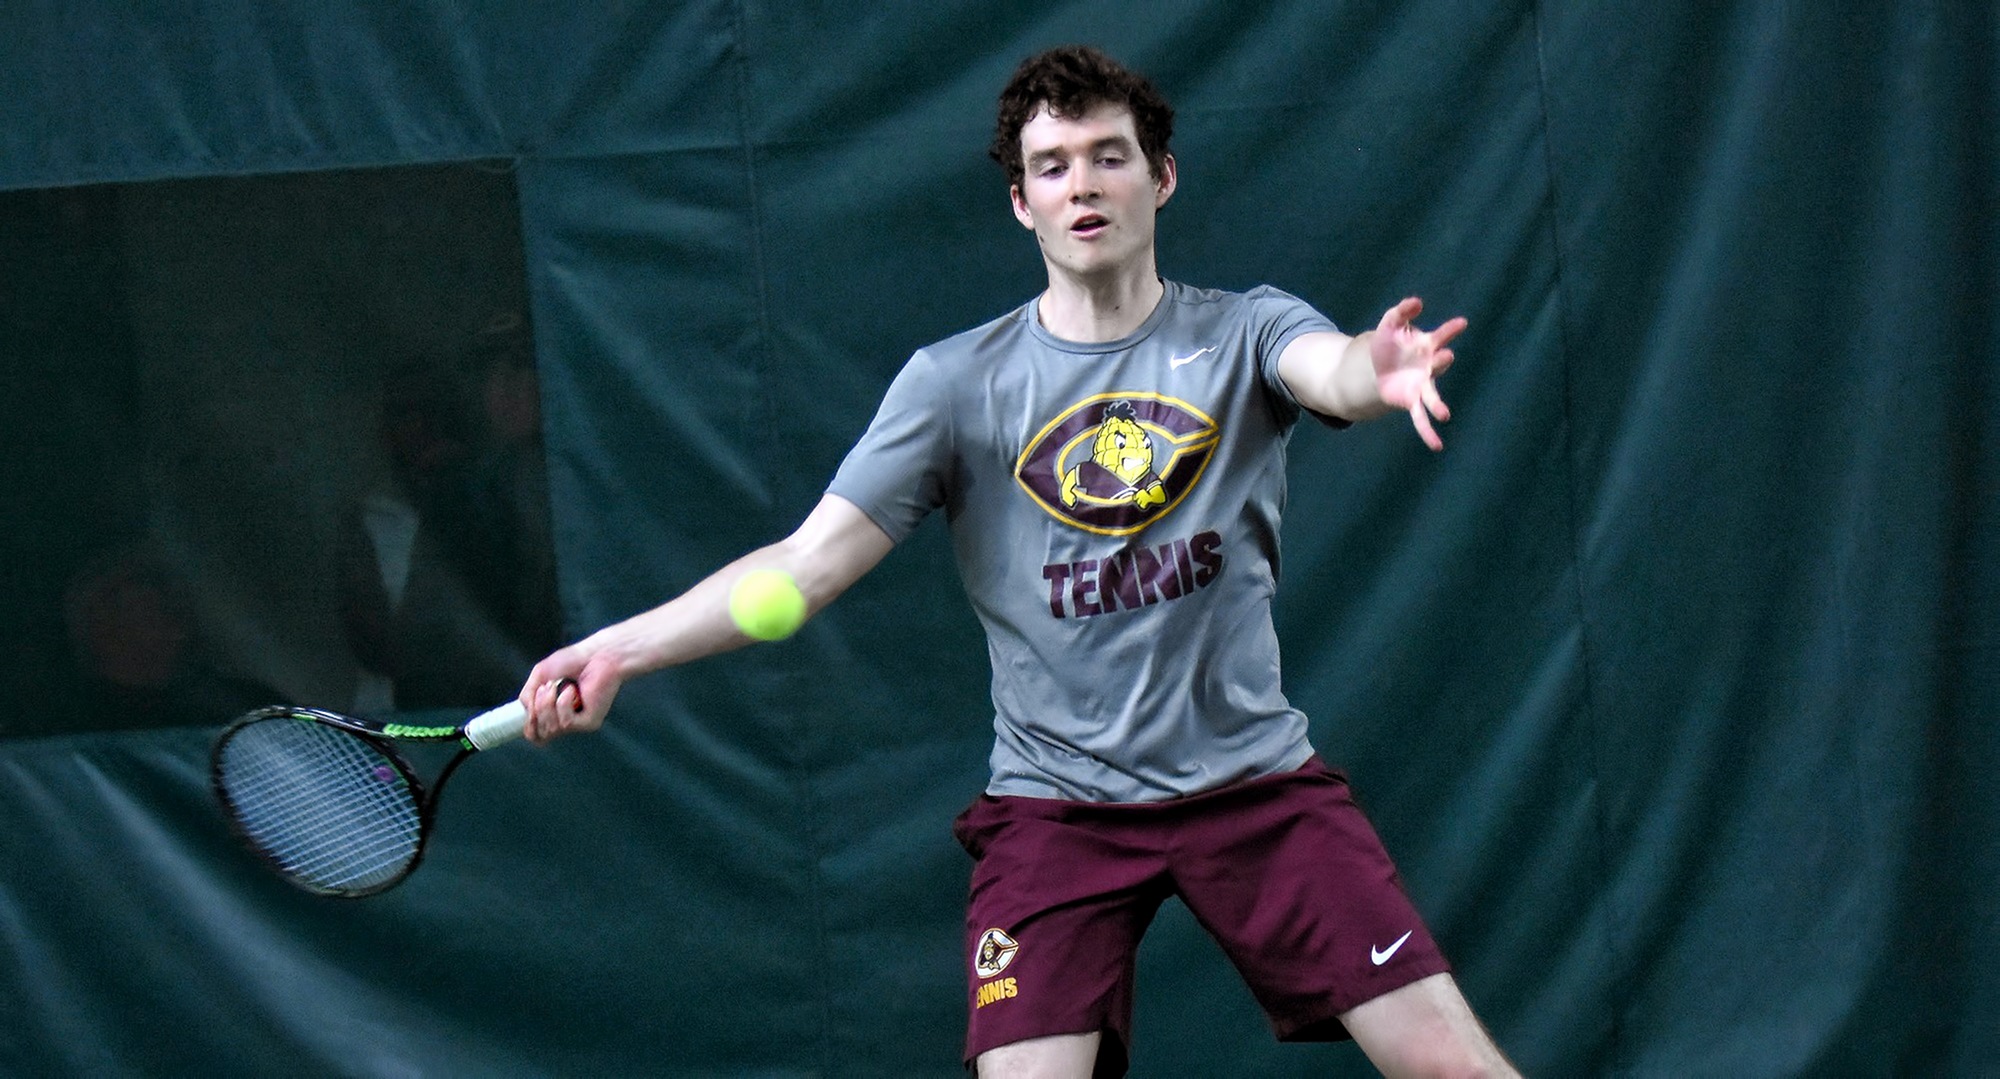 Senior Erik Porter won both of his doubles matches on the opening day of matches in Florida for the Cobbers.